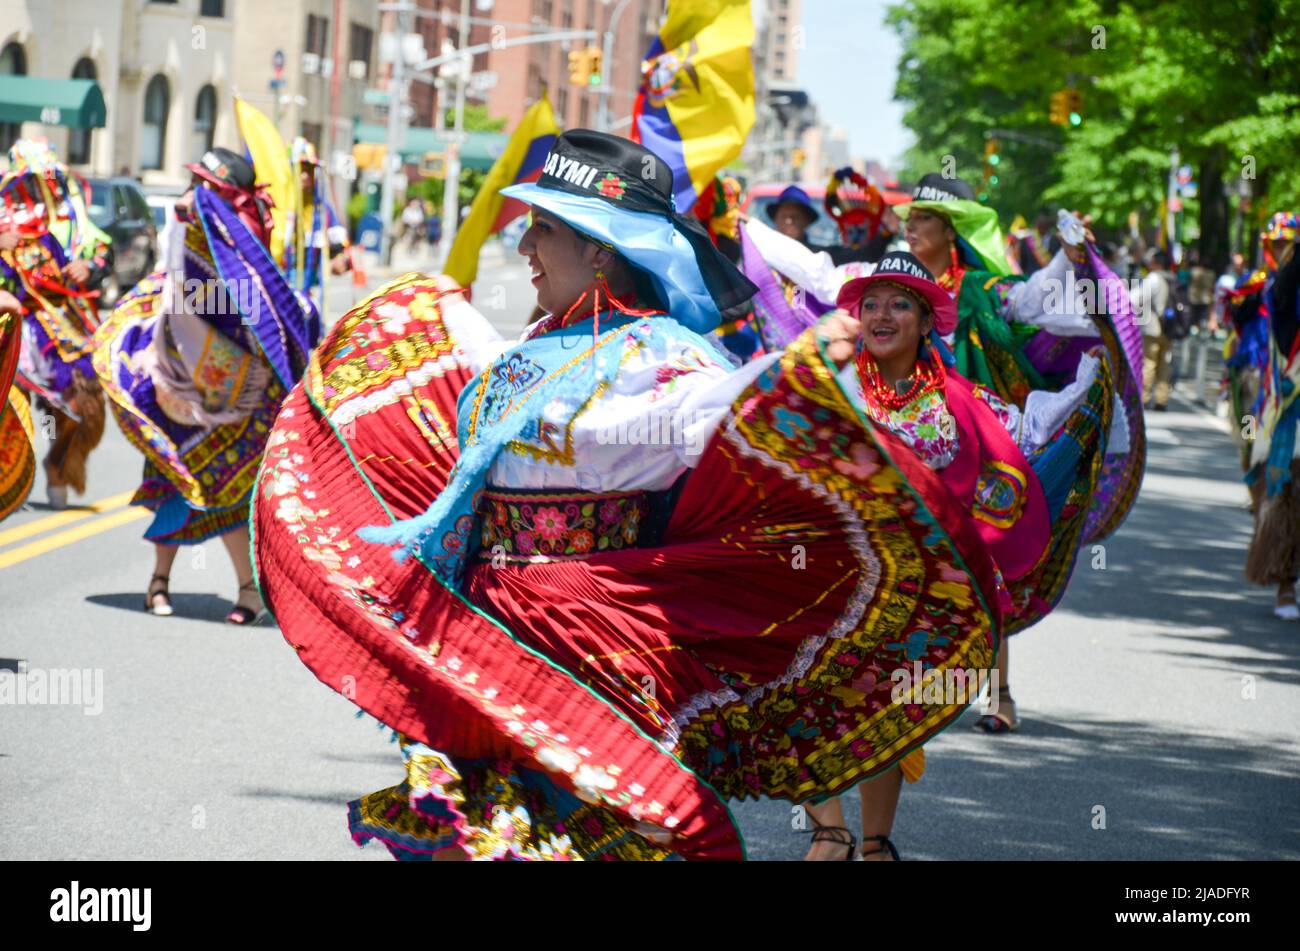 Girls are seen dancing with traditional Ecuadorian outfits during the